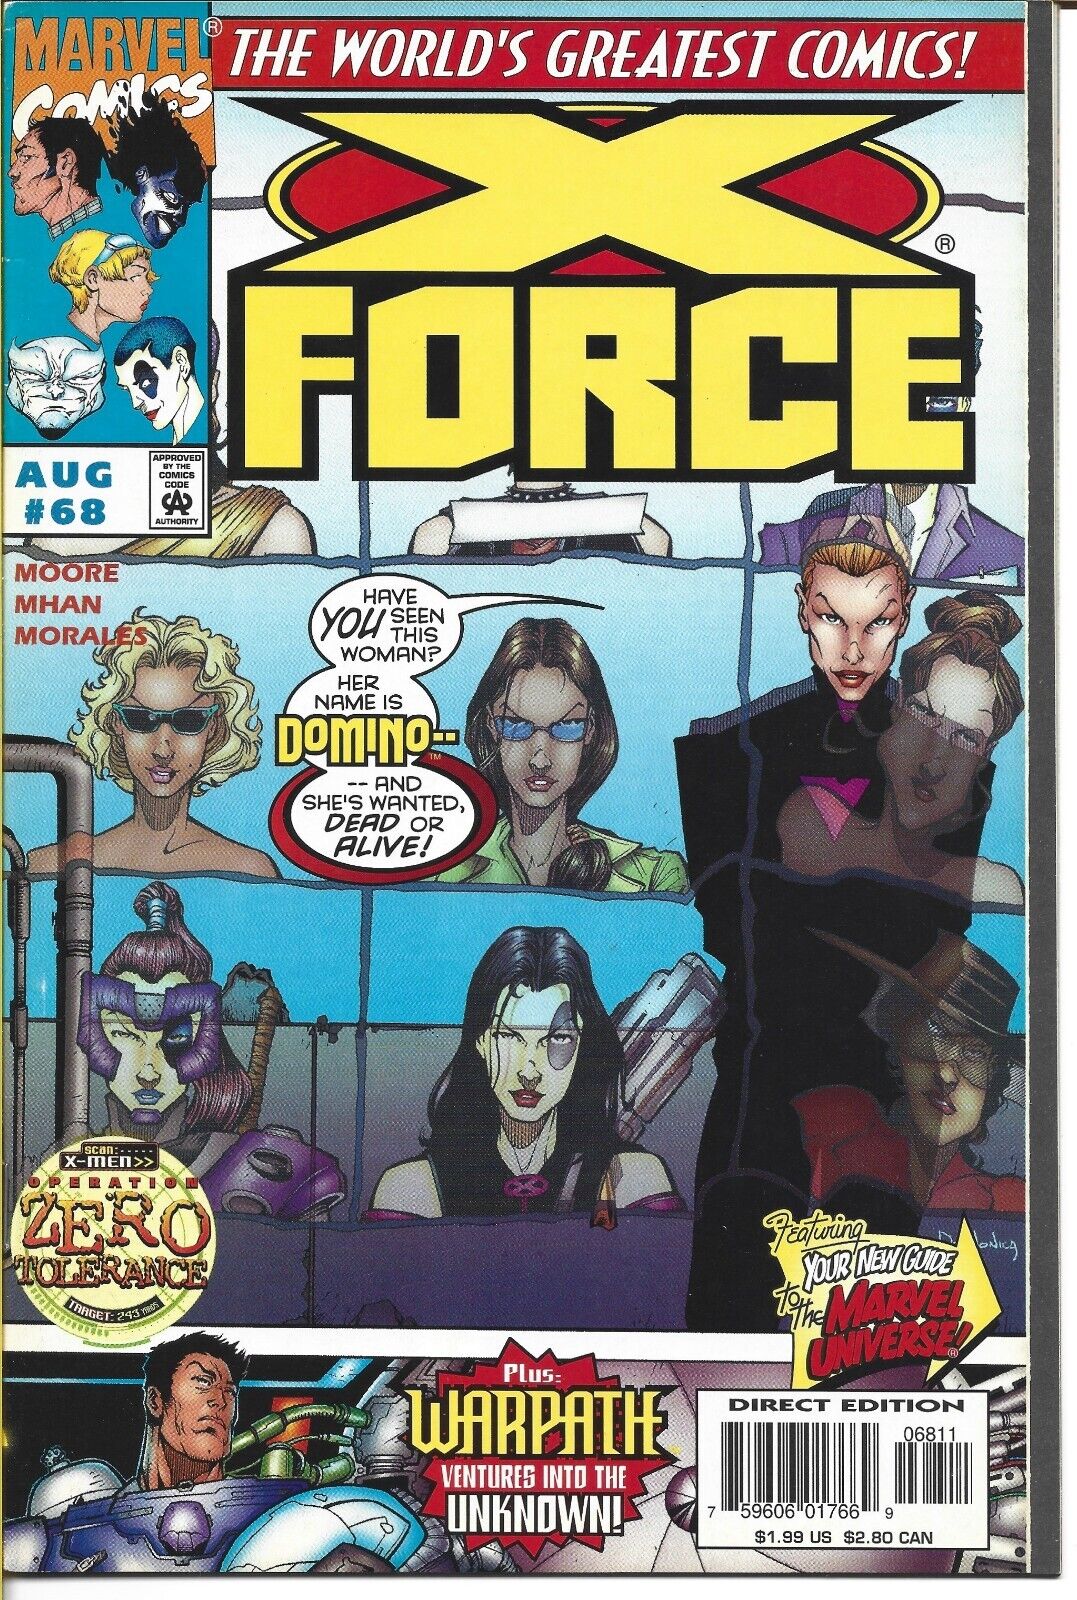 X-FORCE #68 MARVEL COMICS 1997 BAGGED AND BOARDED